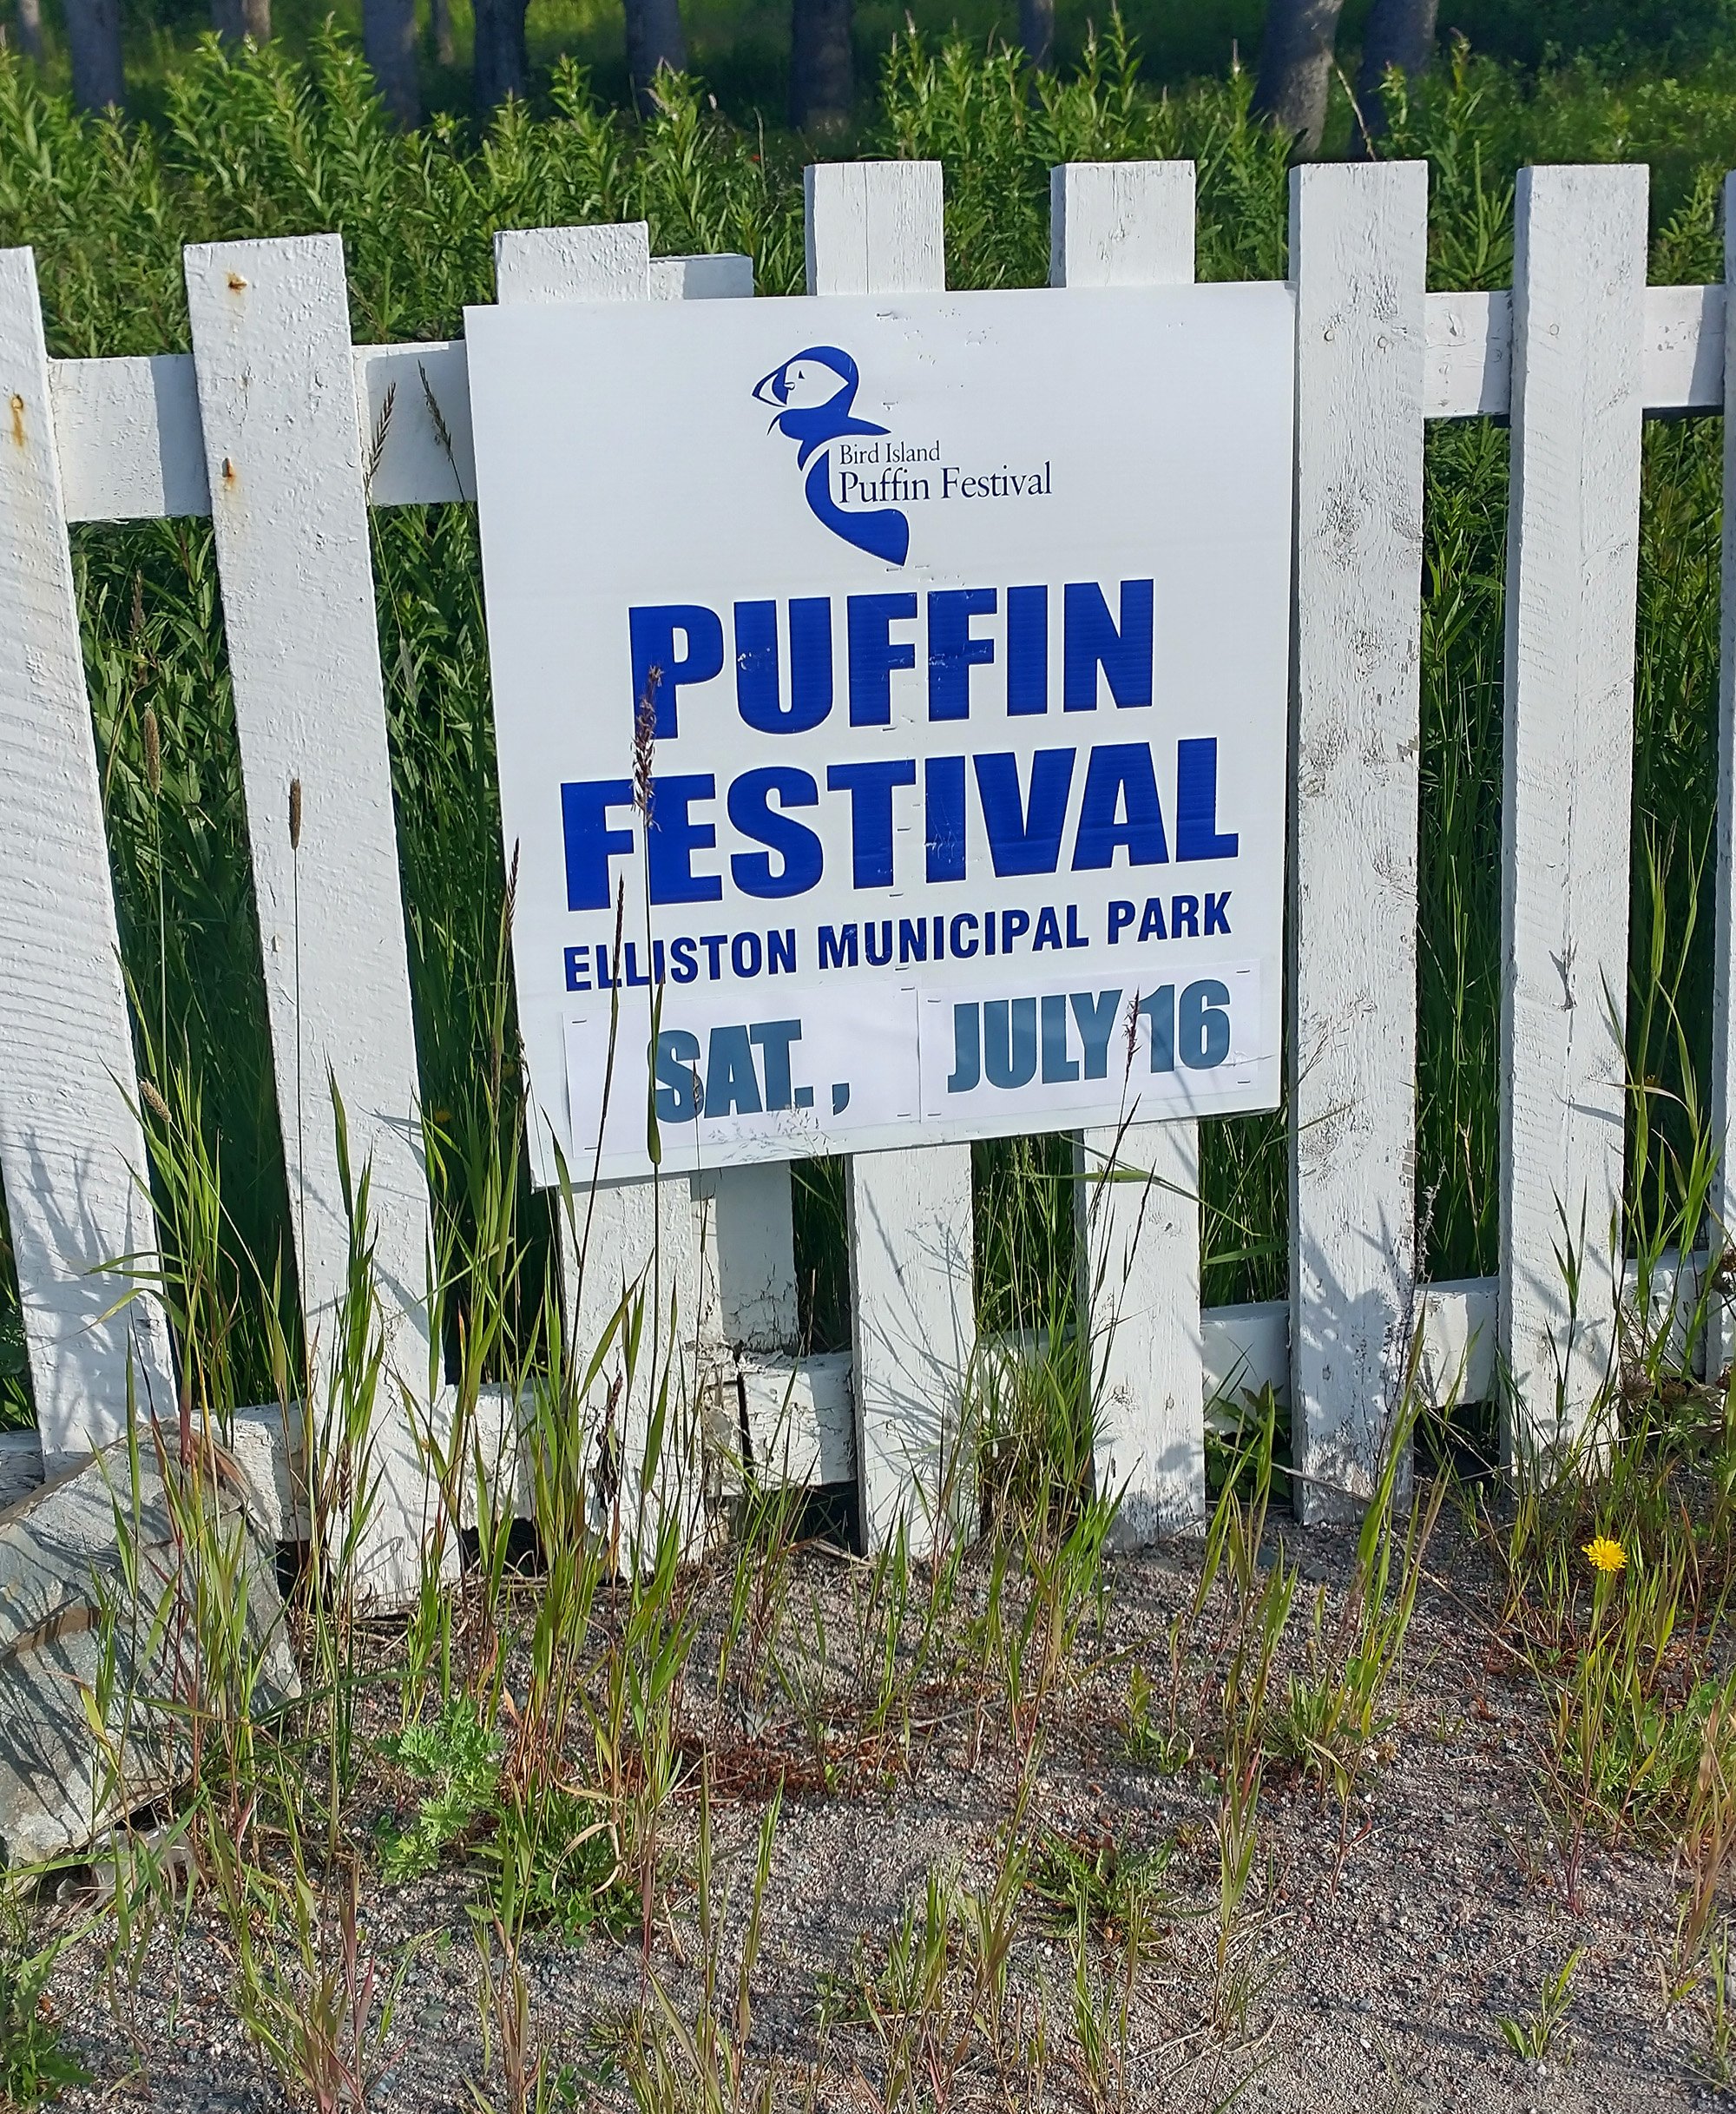 More interestingly the town has a puffin viewing area and thus its tourism centers around them.